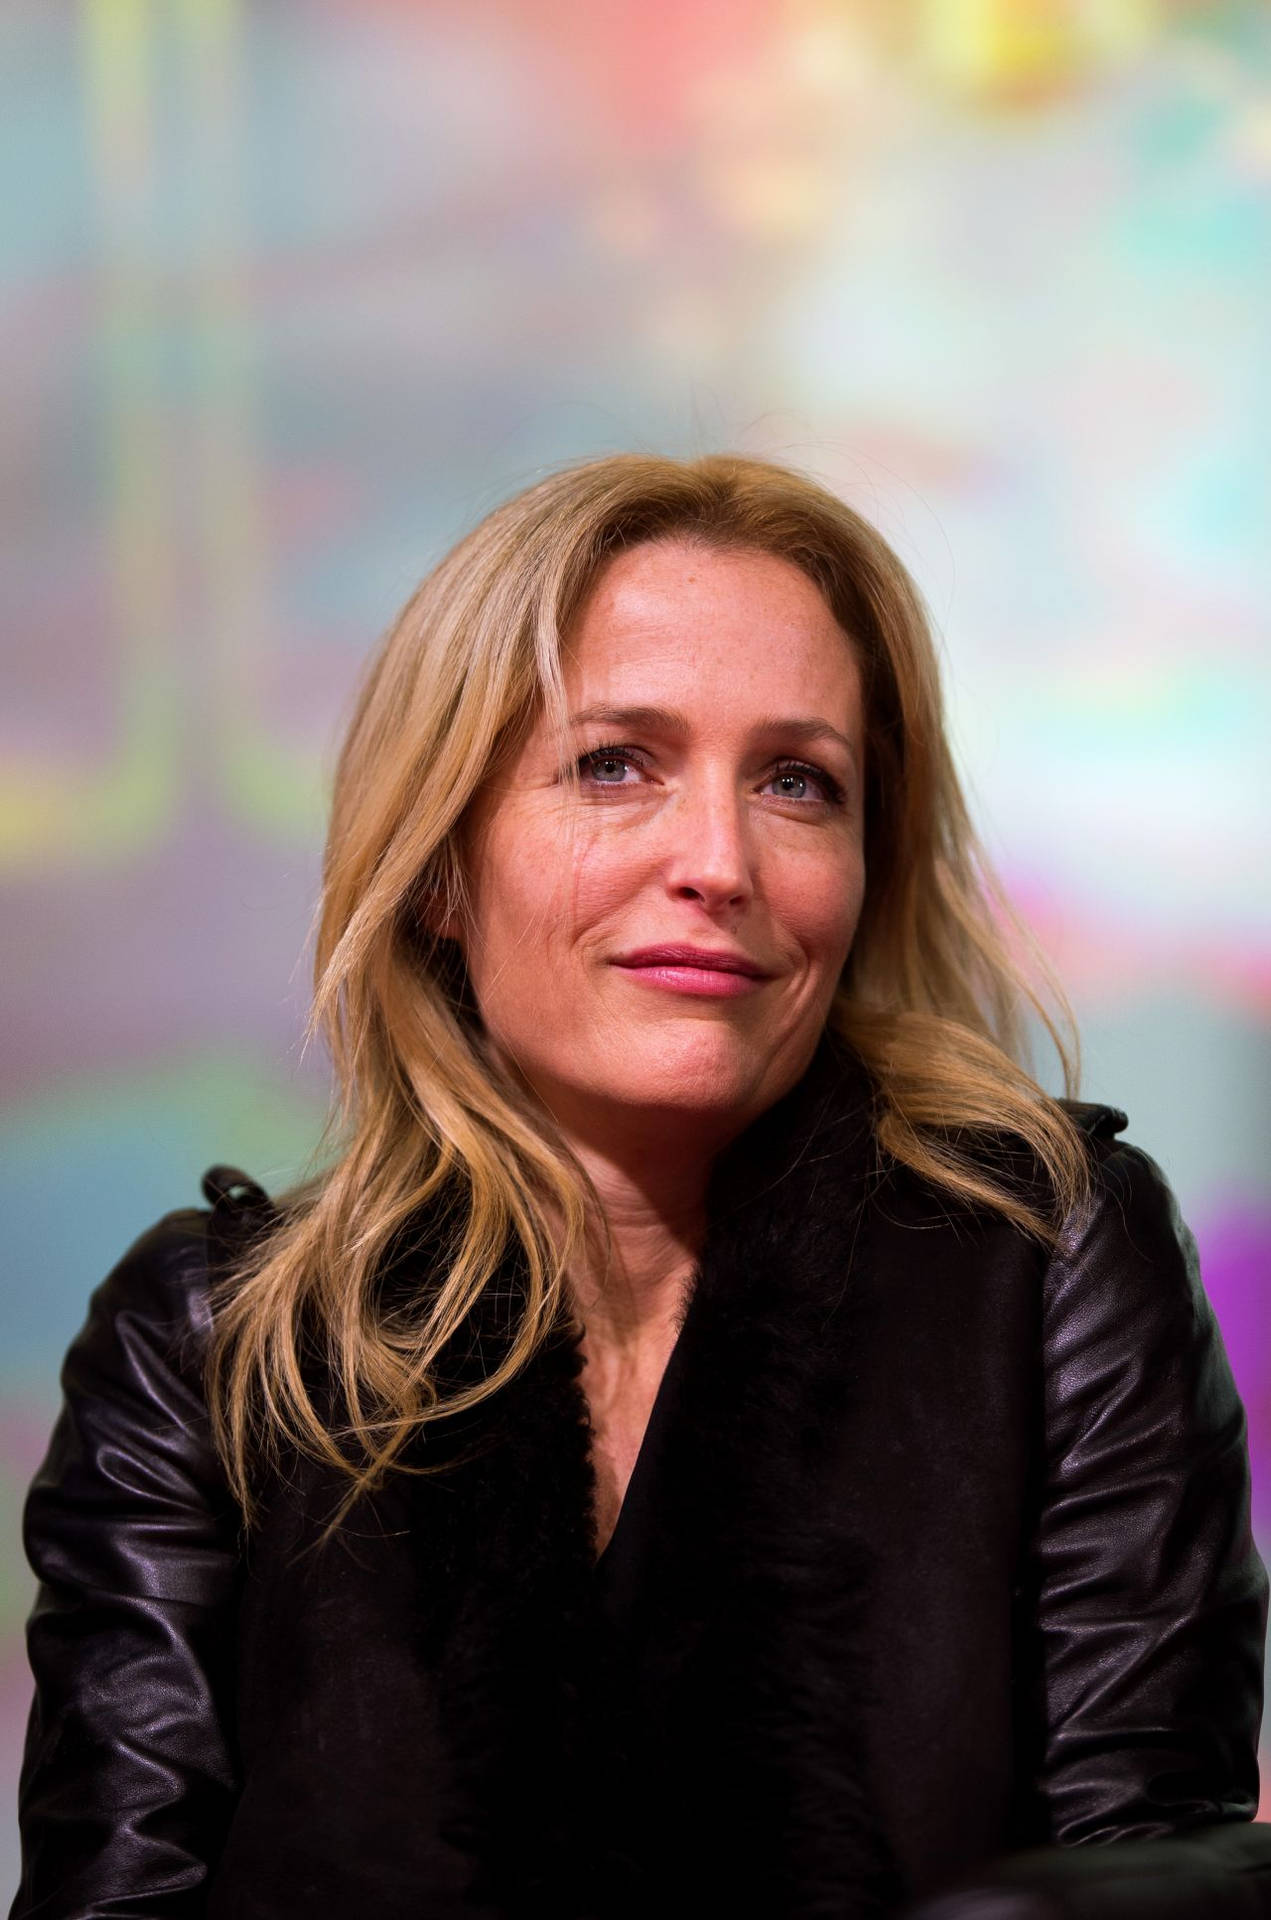 Gillian Anderson During An X-files Meet And Greet